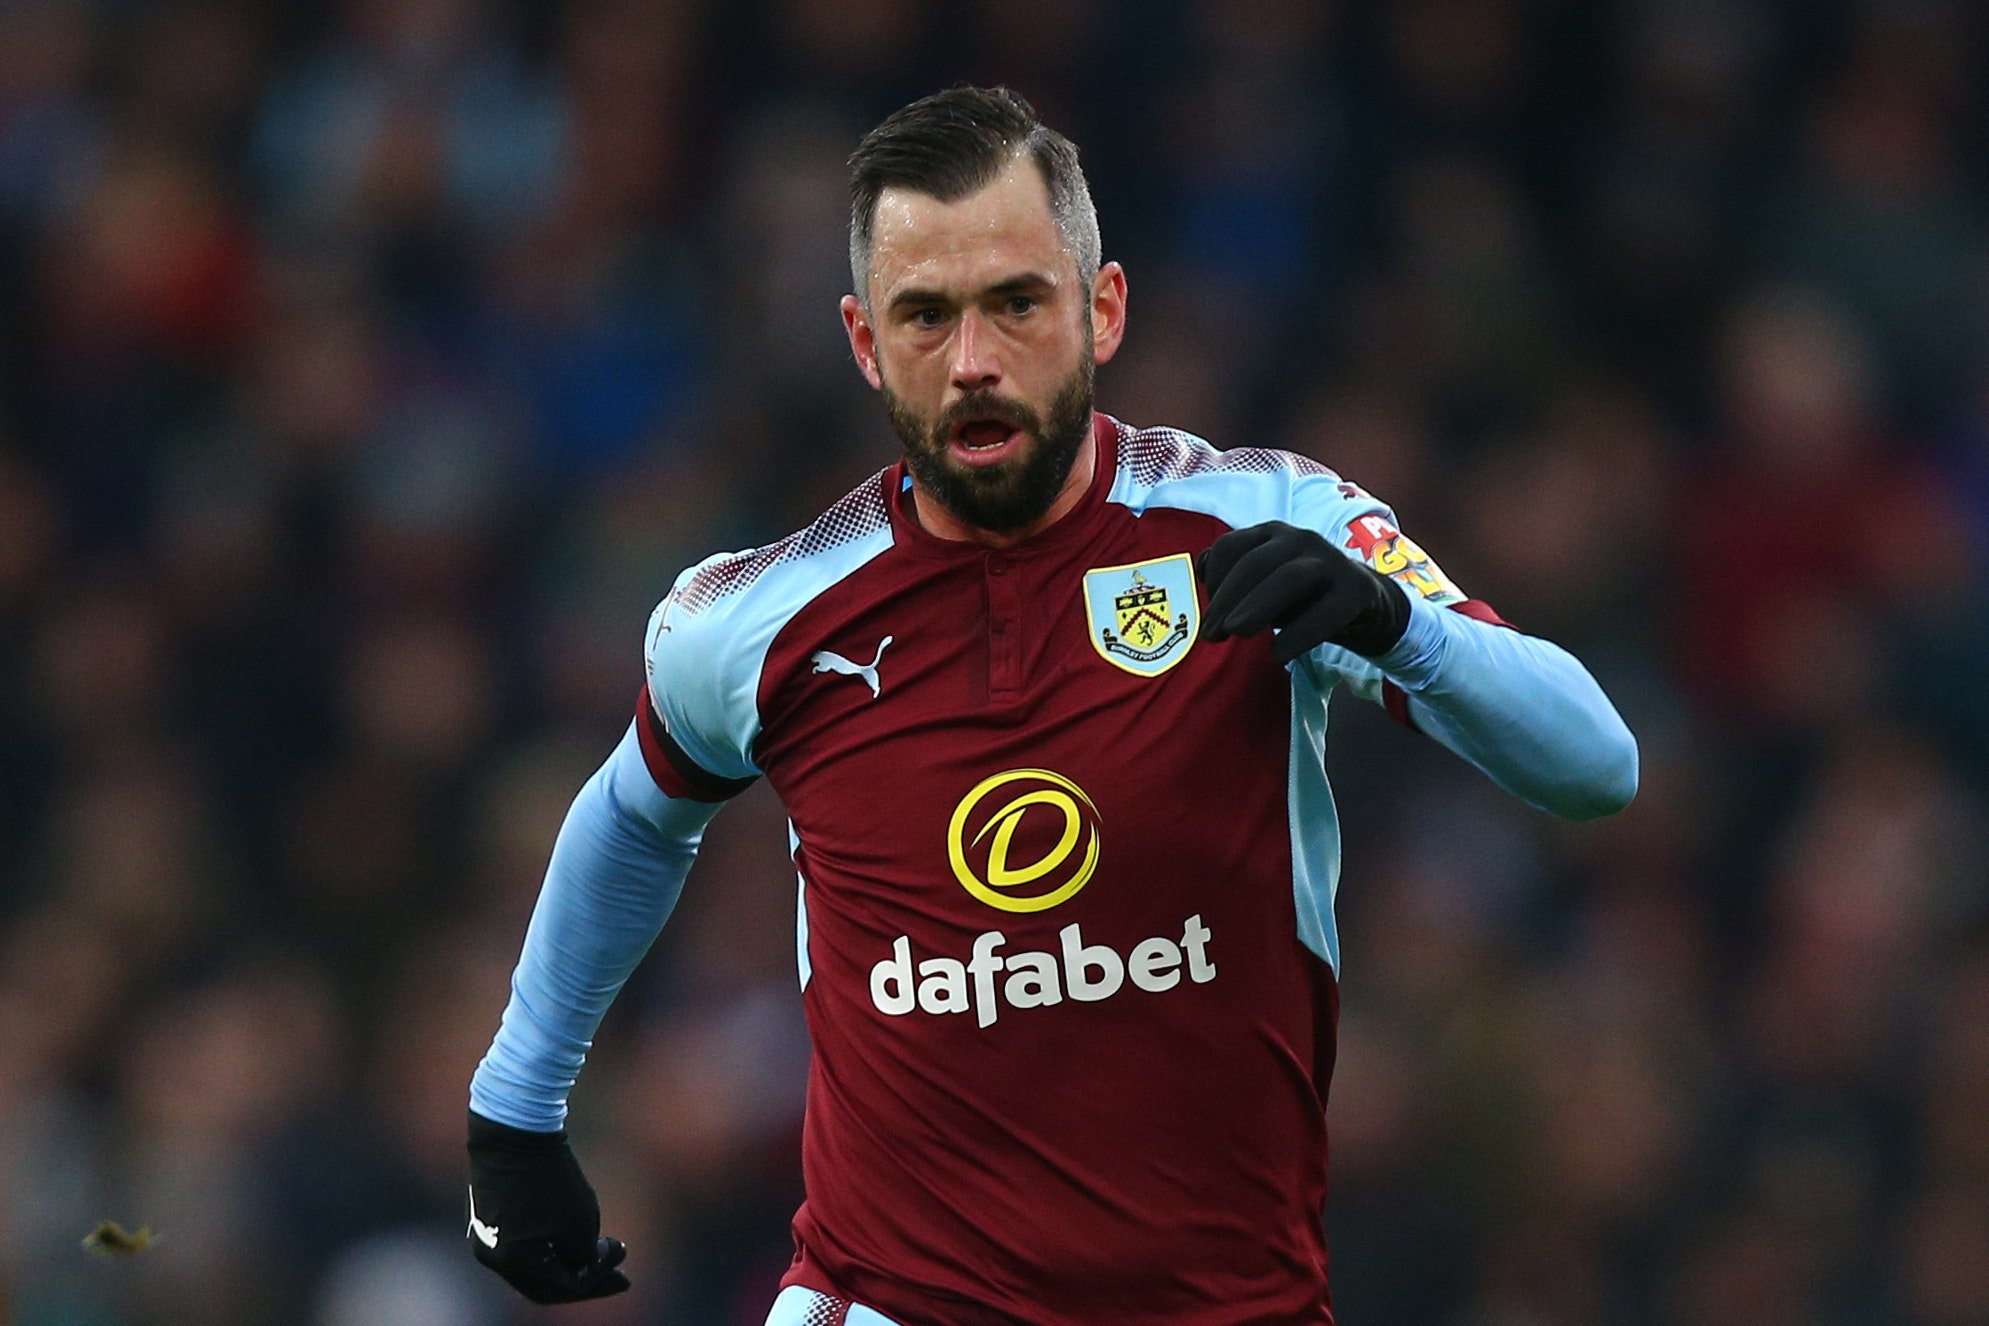 Happy birthday to Burnley and Belgium midfielder Steven Defour, who turns 30 today! 